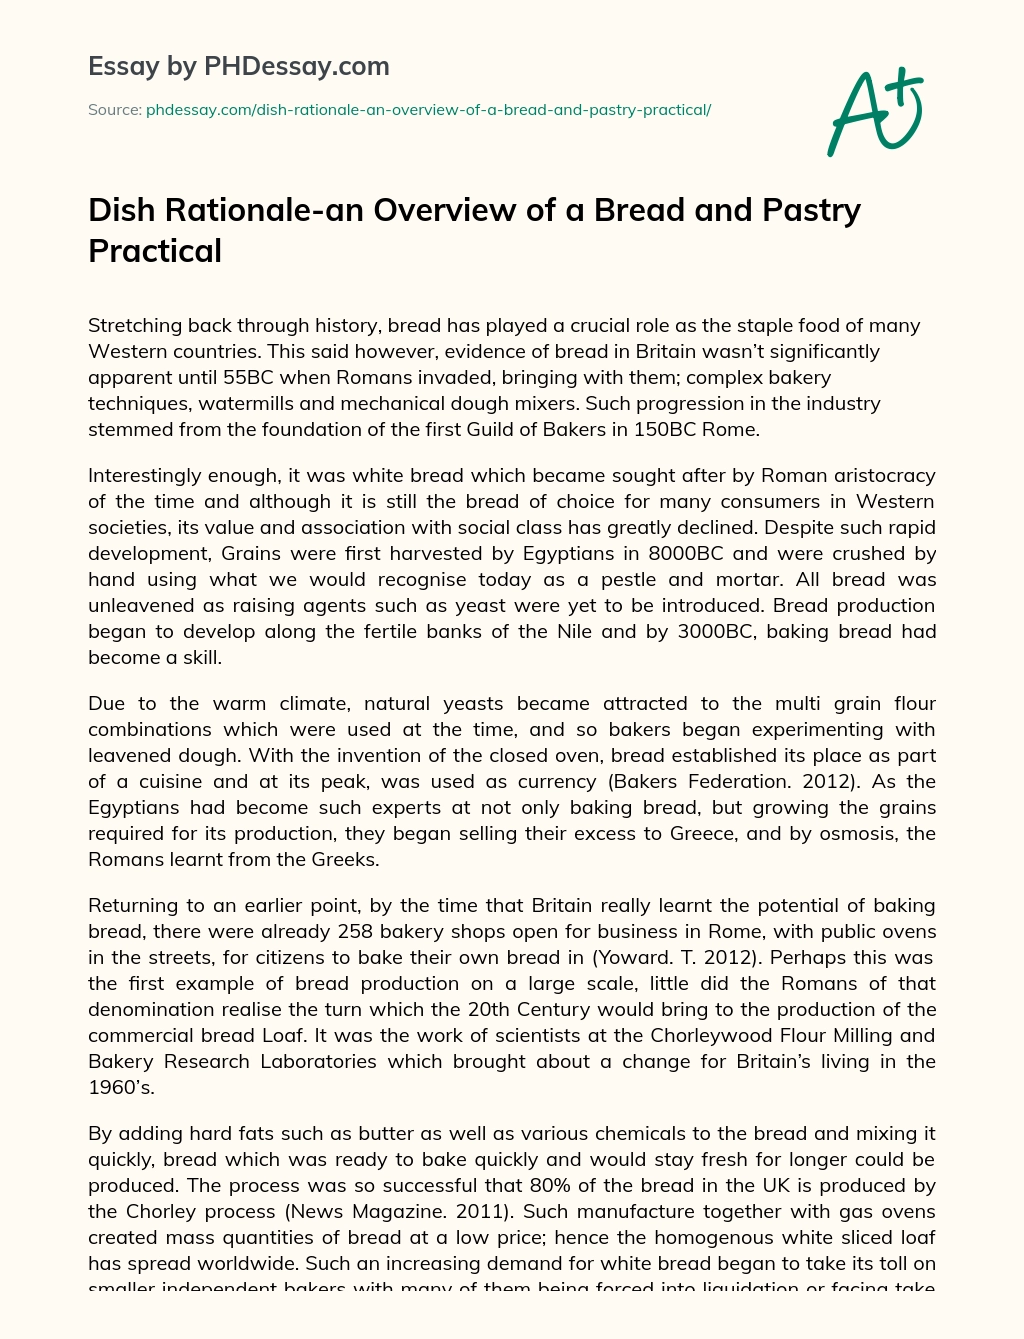 Dish Rationale-an Overview of a Bread and Pastry Practical essay